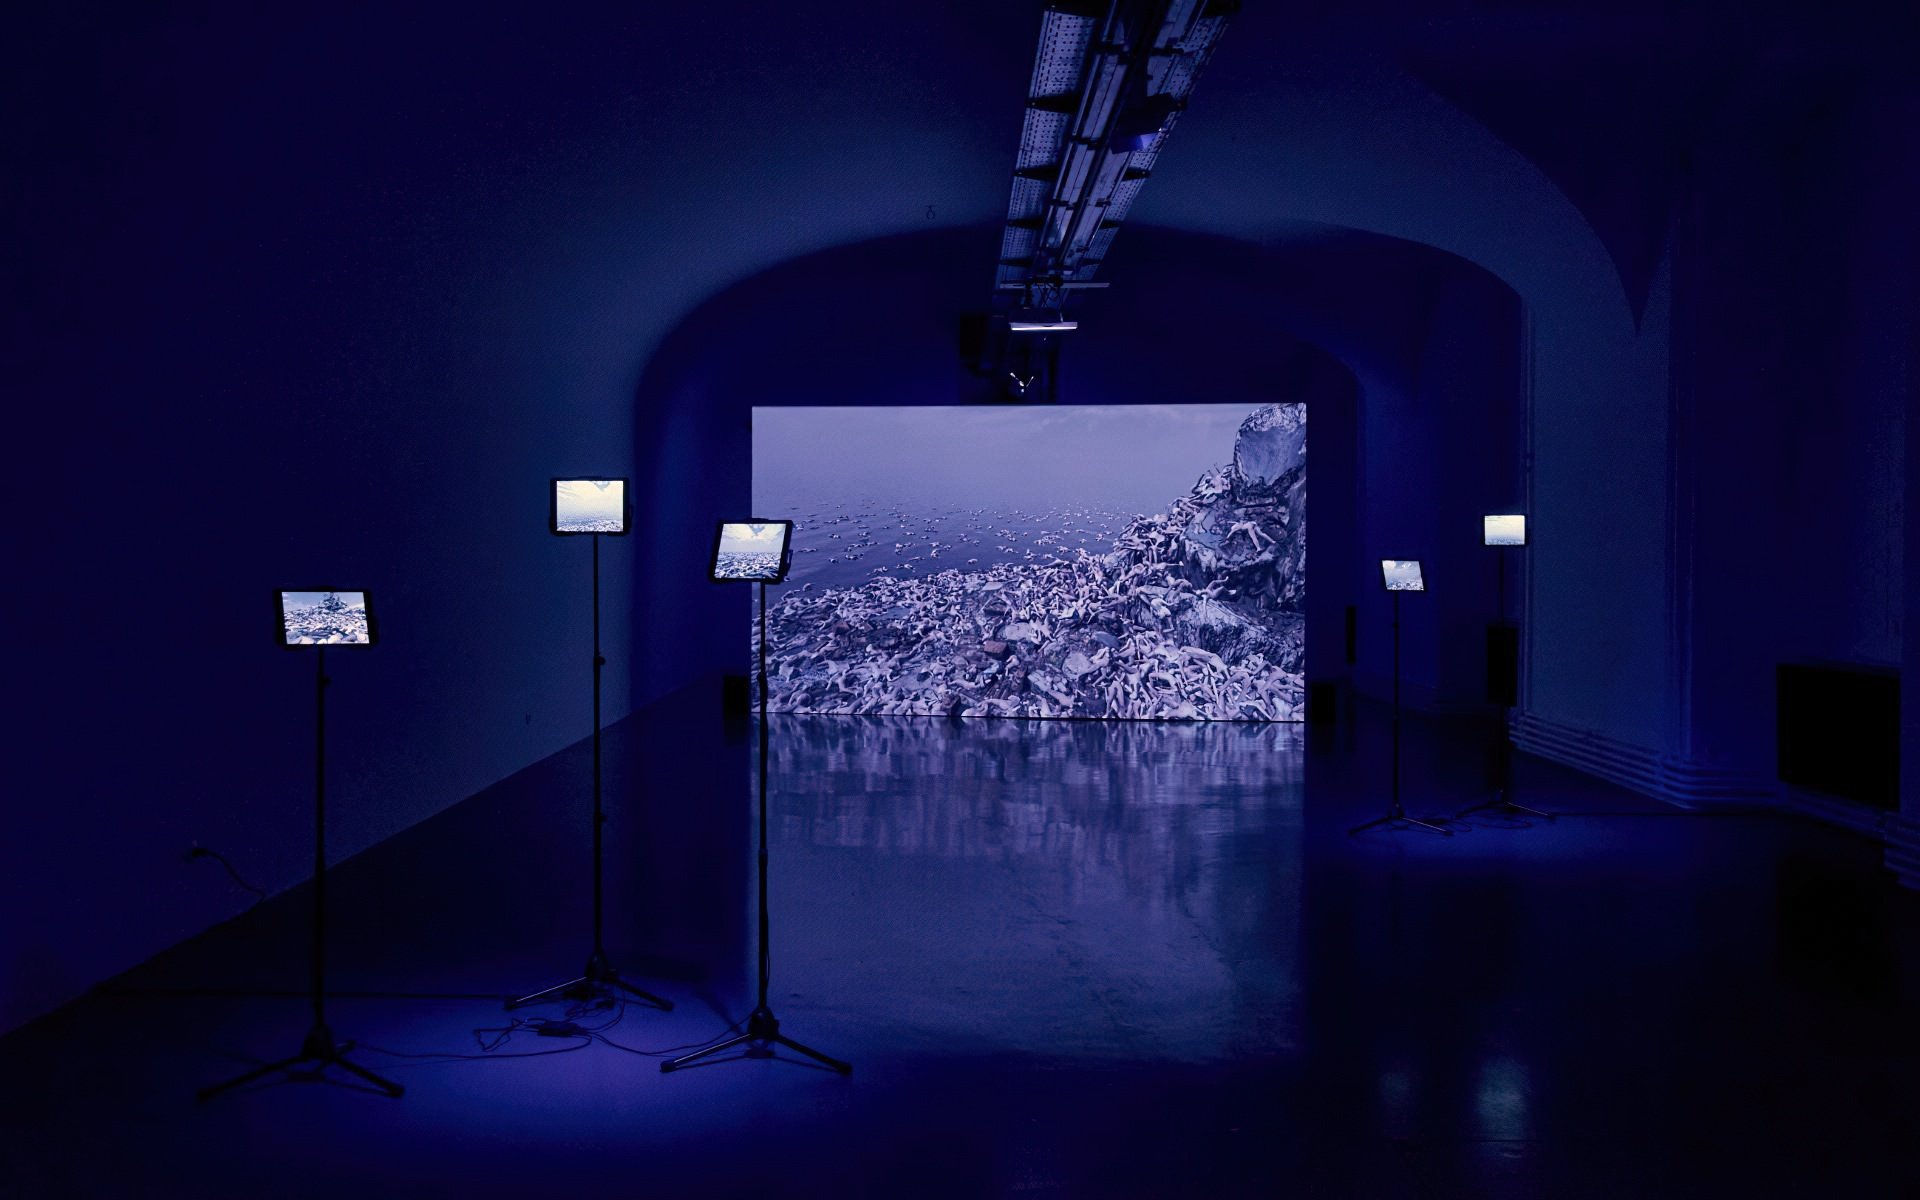 Martina Menegon, when I am close to you I shiver, installation shot by Georg Mayer, MAK, Museum of Applied Arts, Wien, 2020 